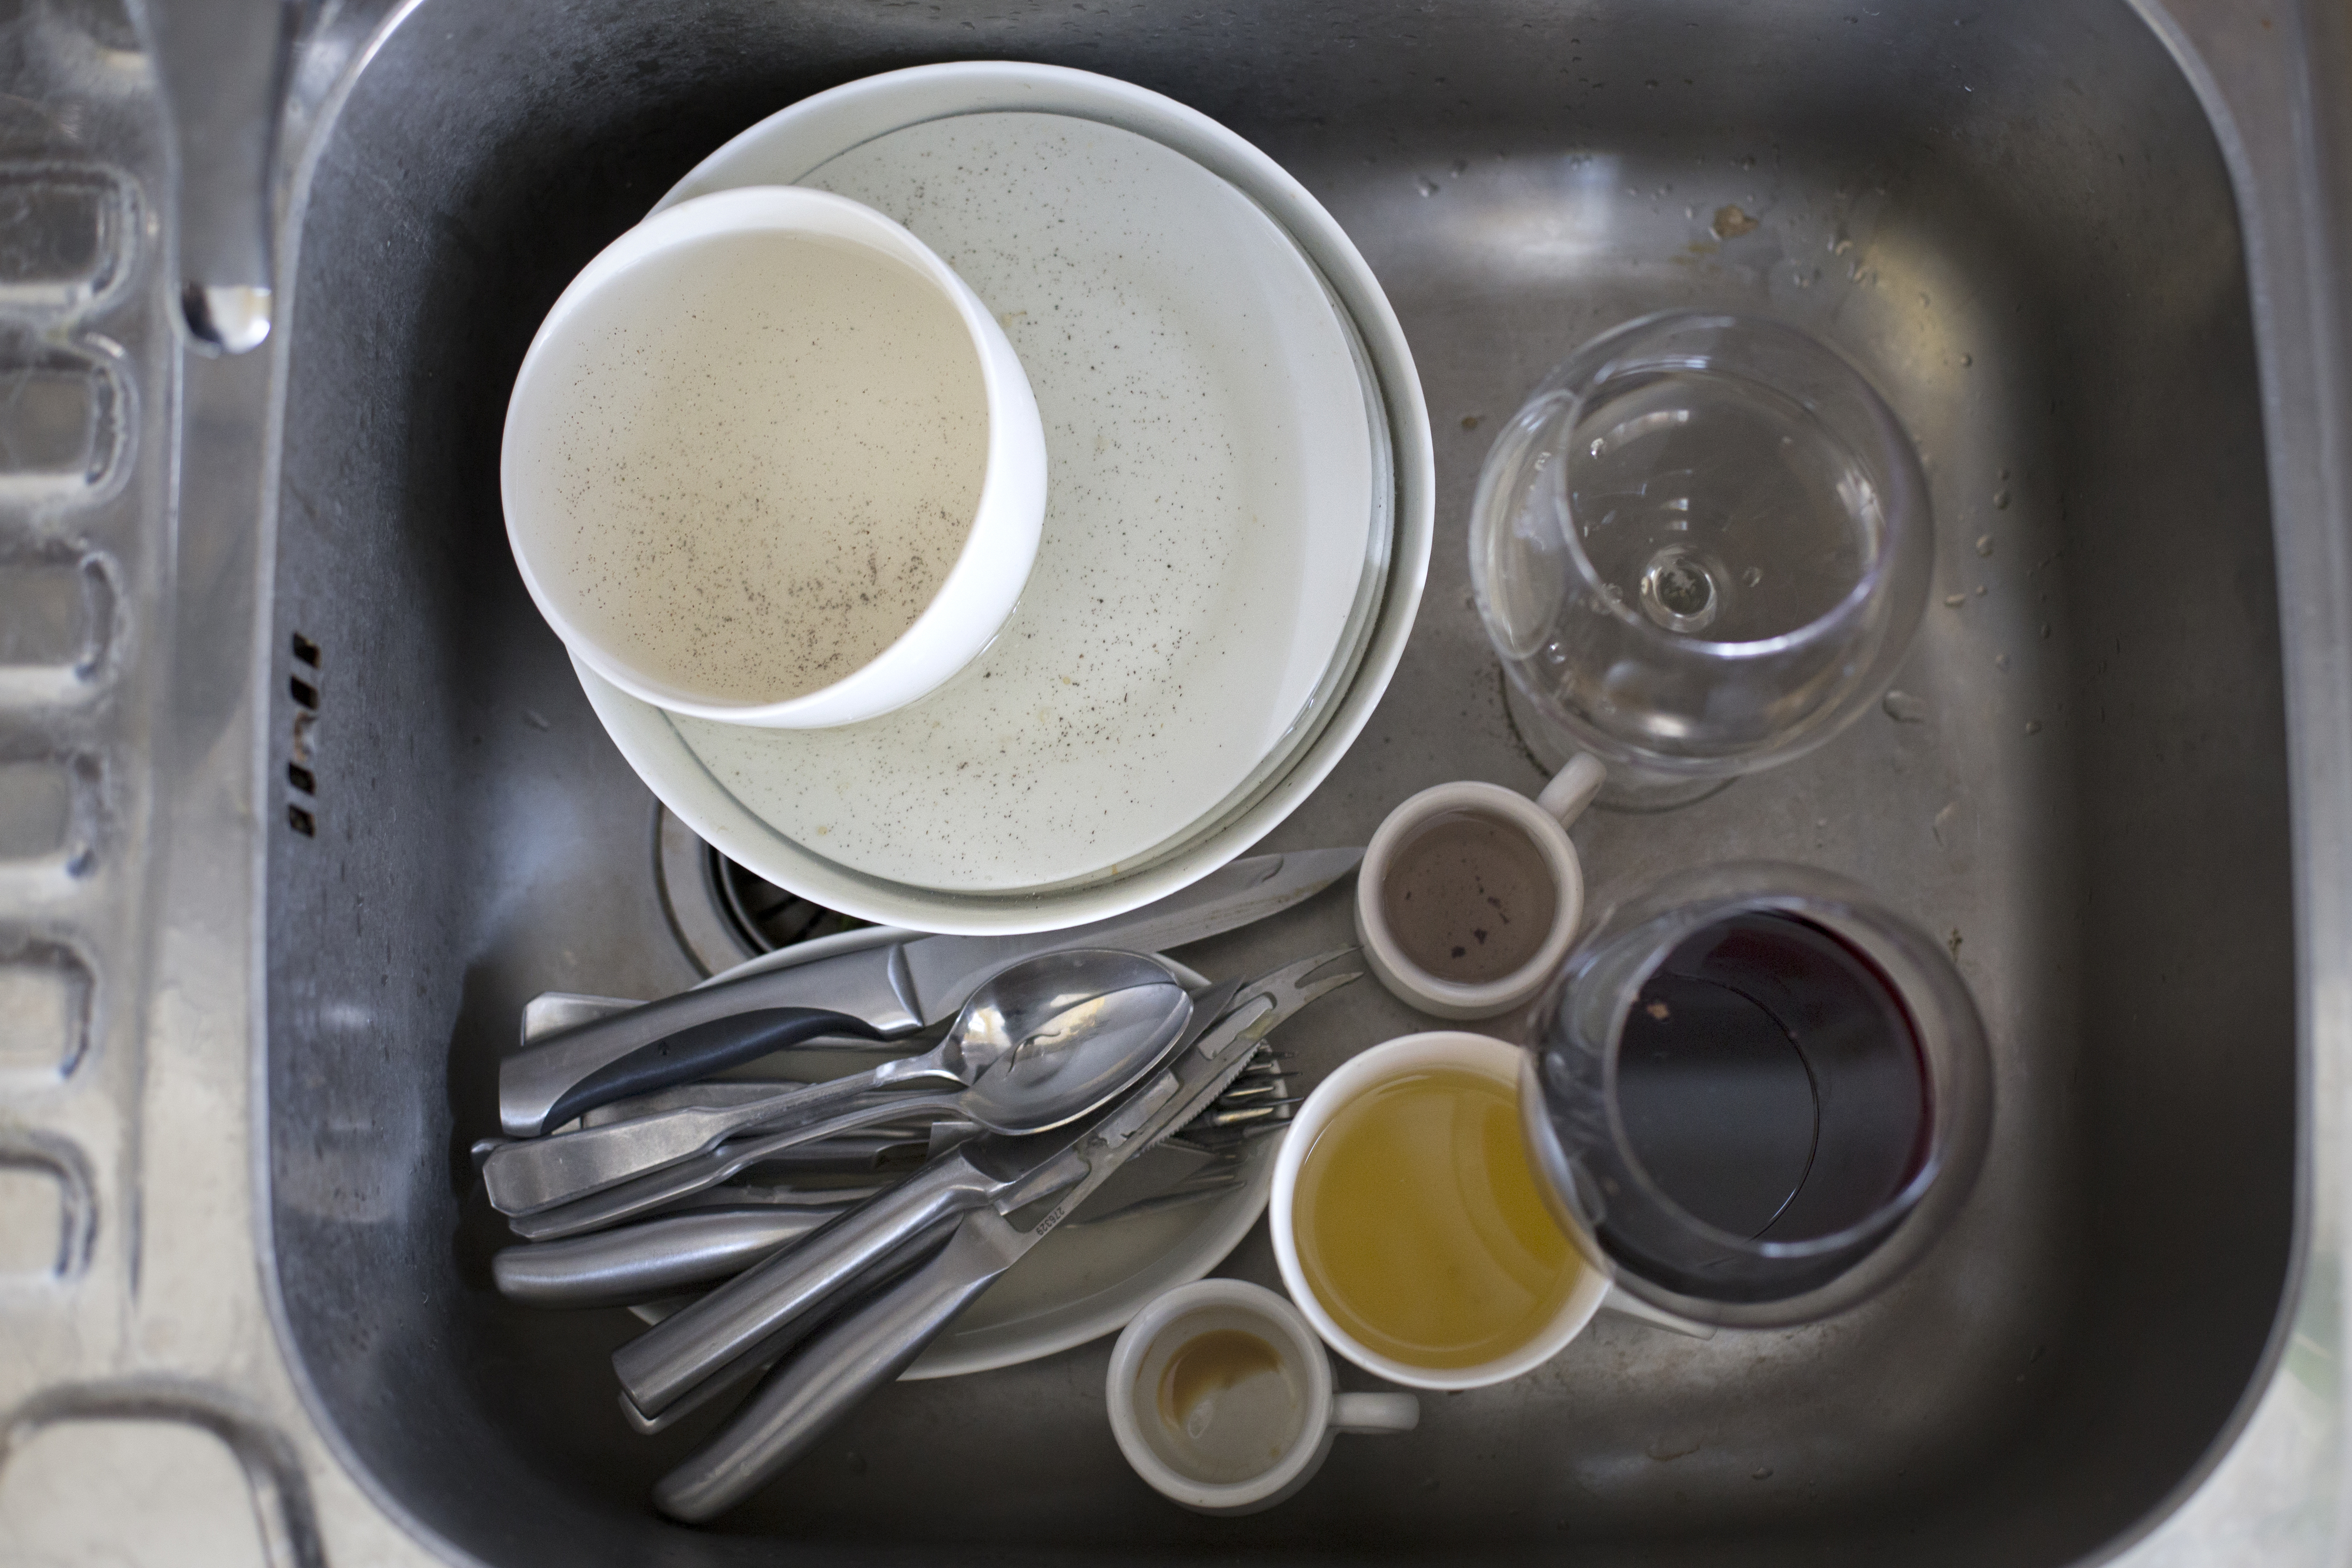 A kitchen sink filled with various dirty dishes including plates, cups, and utensils